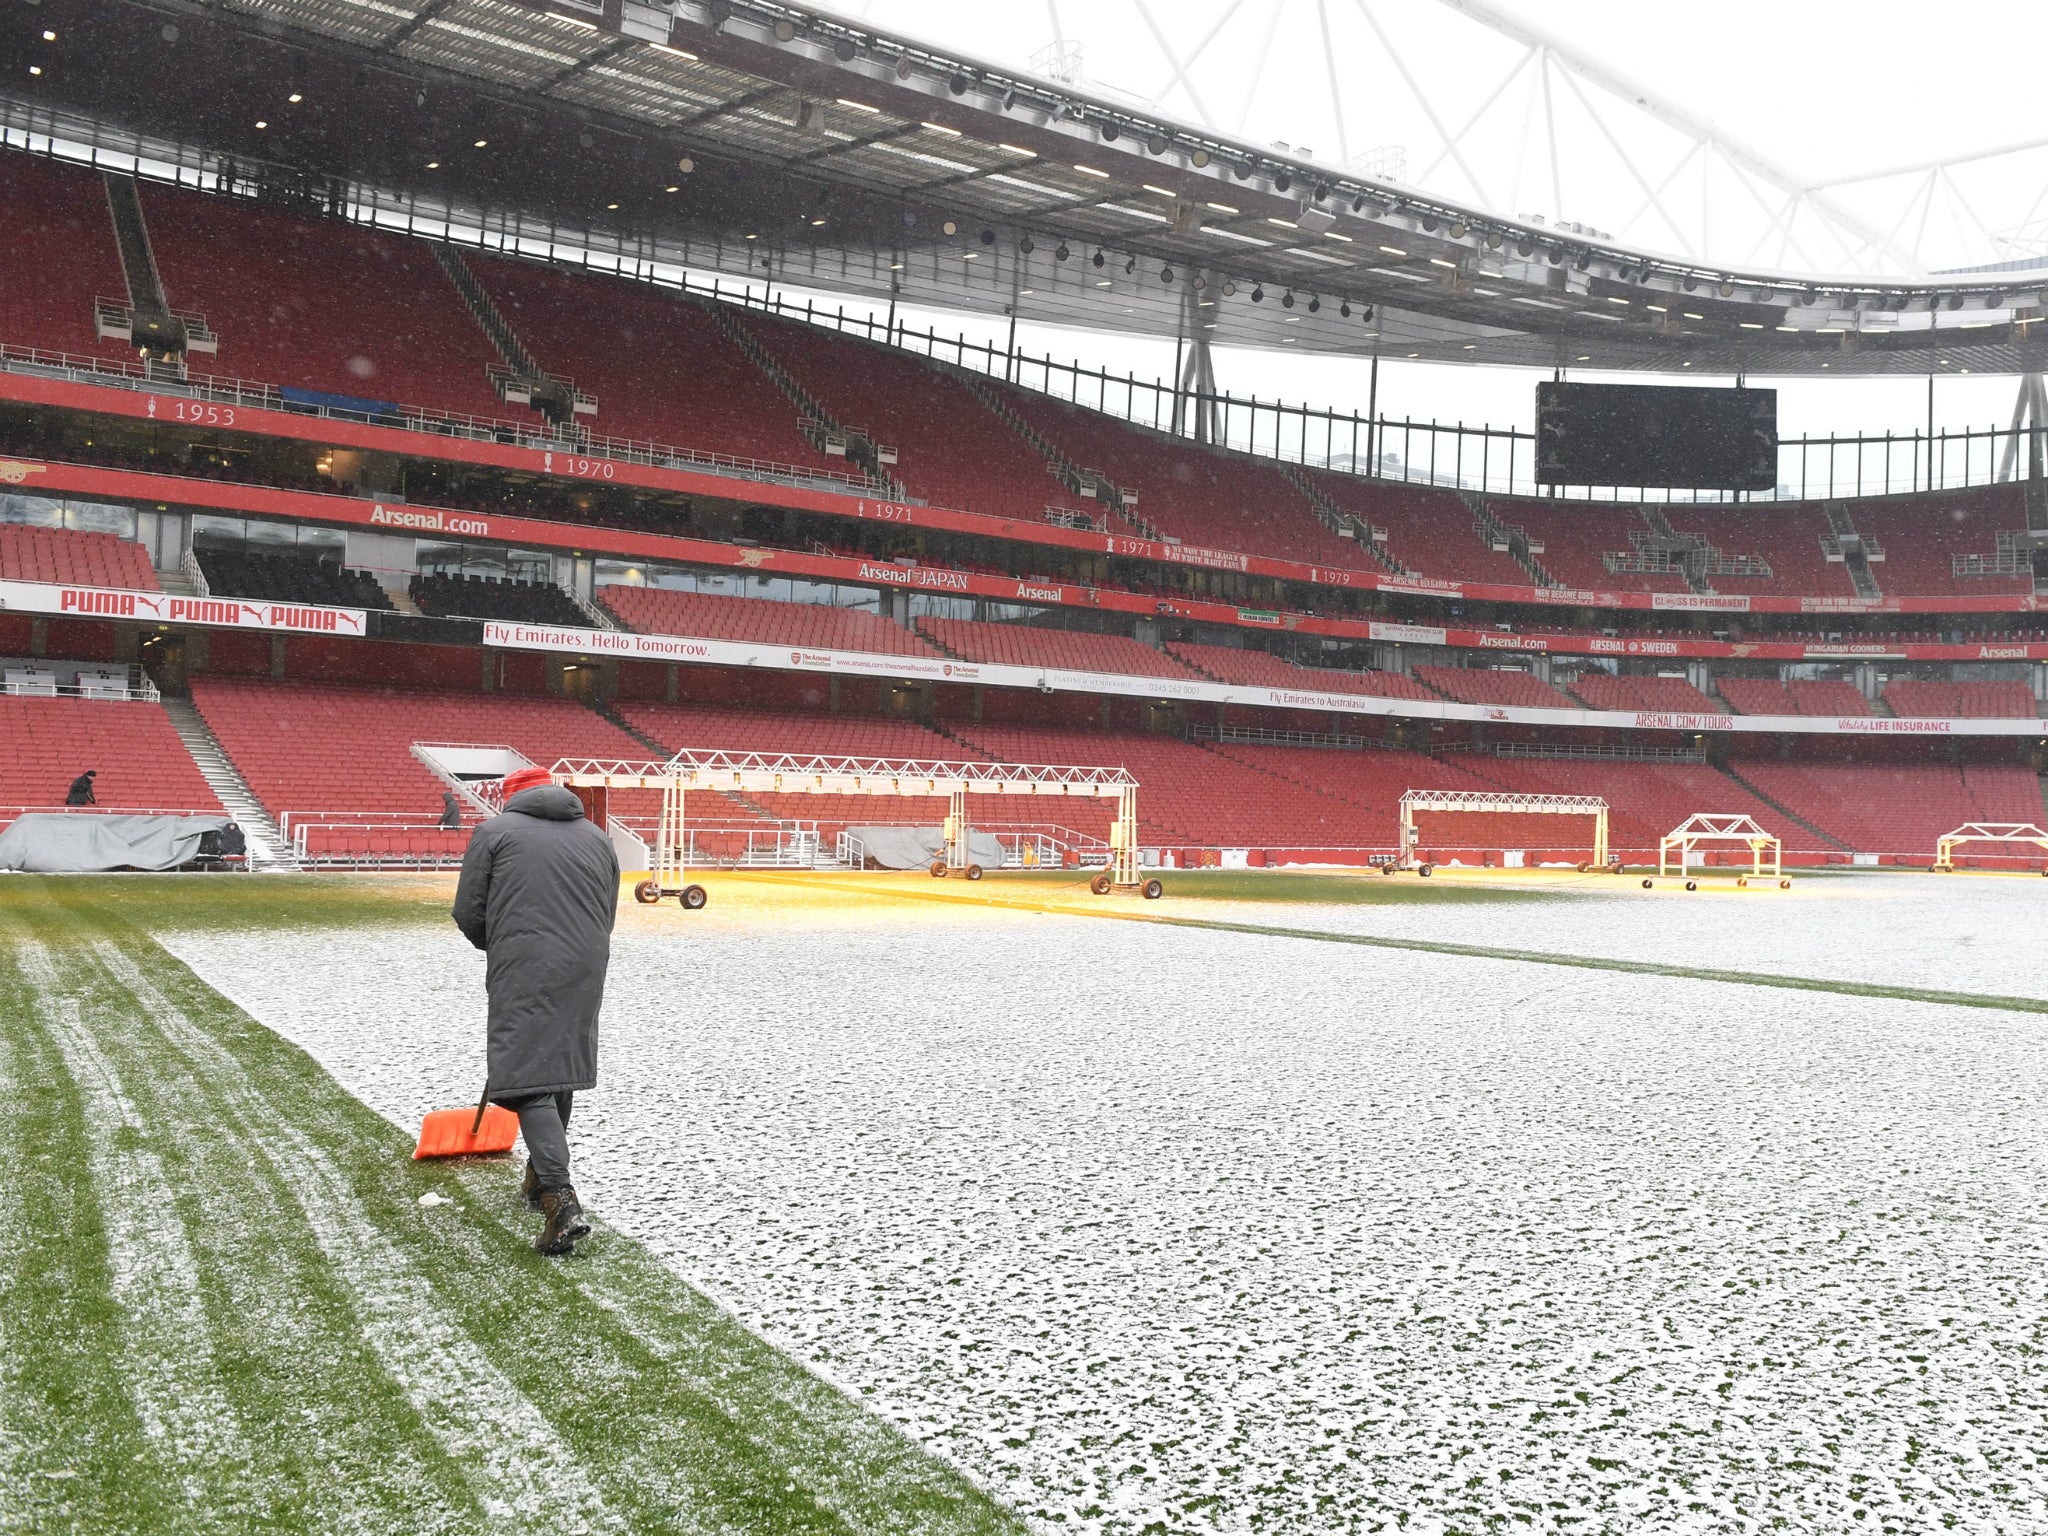 Arsenal have urged fans to keep an eye on the latest travel information